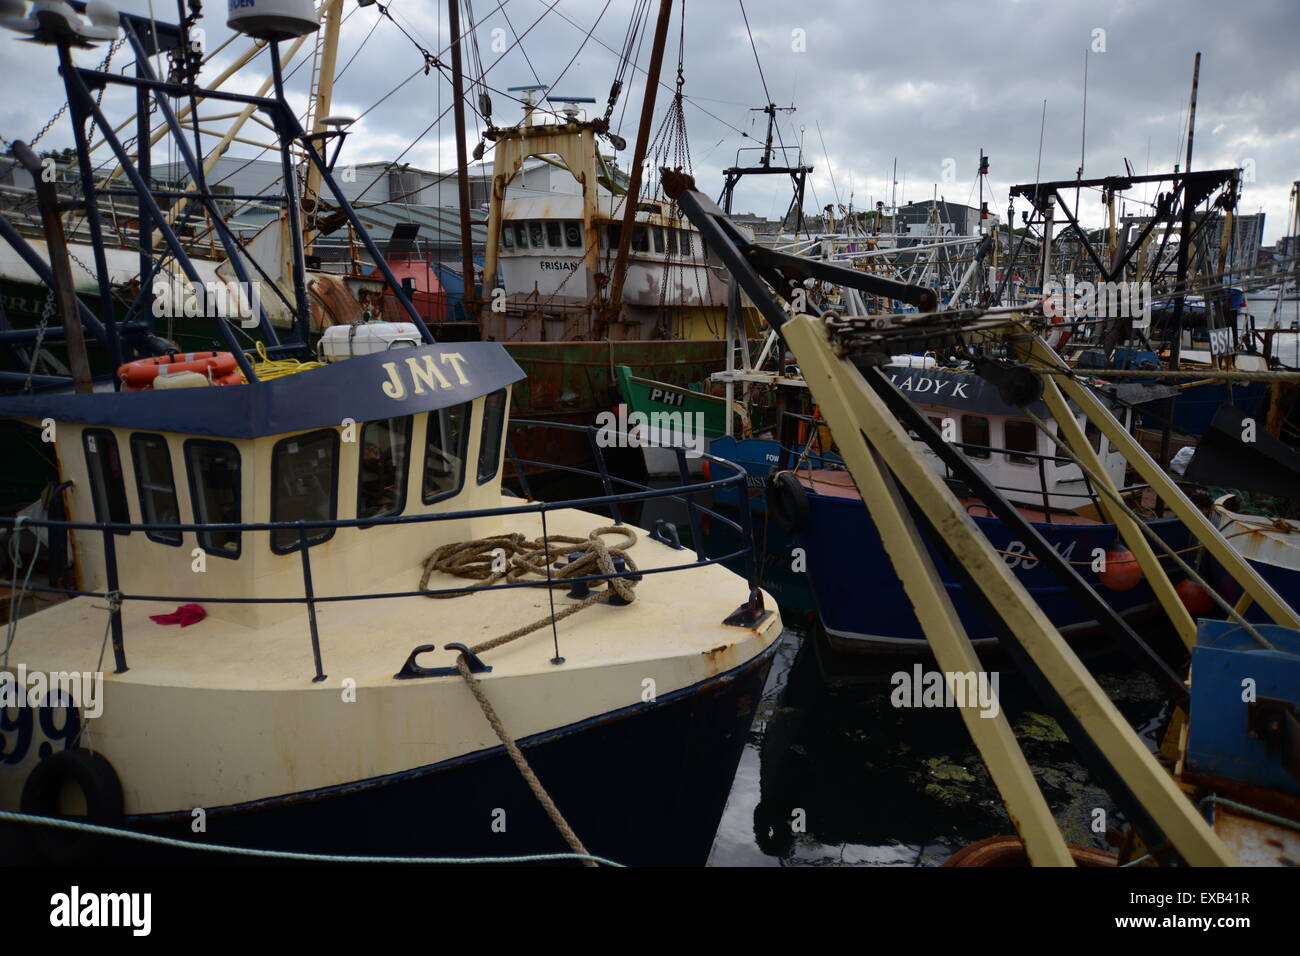 Fishing vessels moored in Sutton Harbour Plymouth including Sunk Scalloper JMT Stock Photo